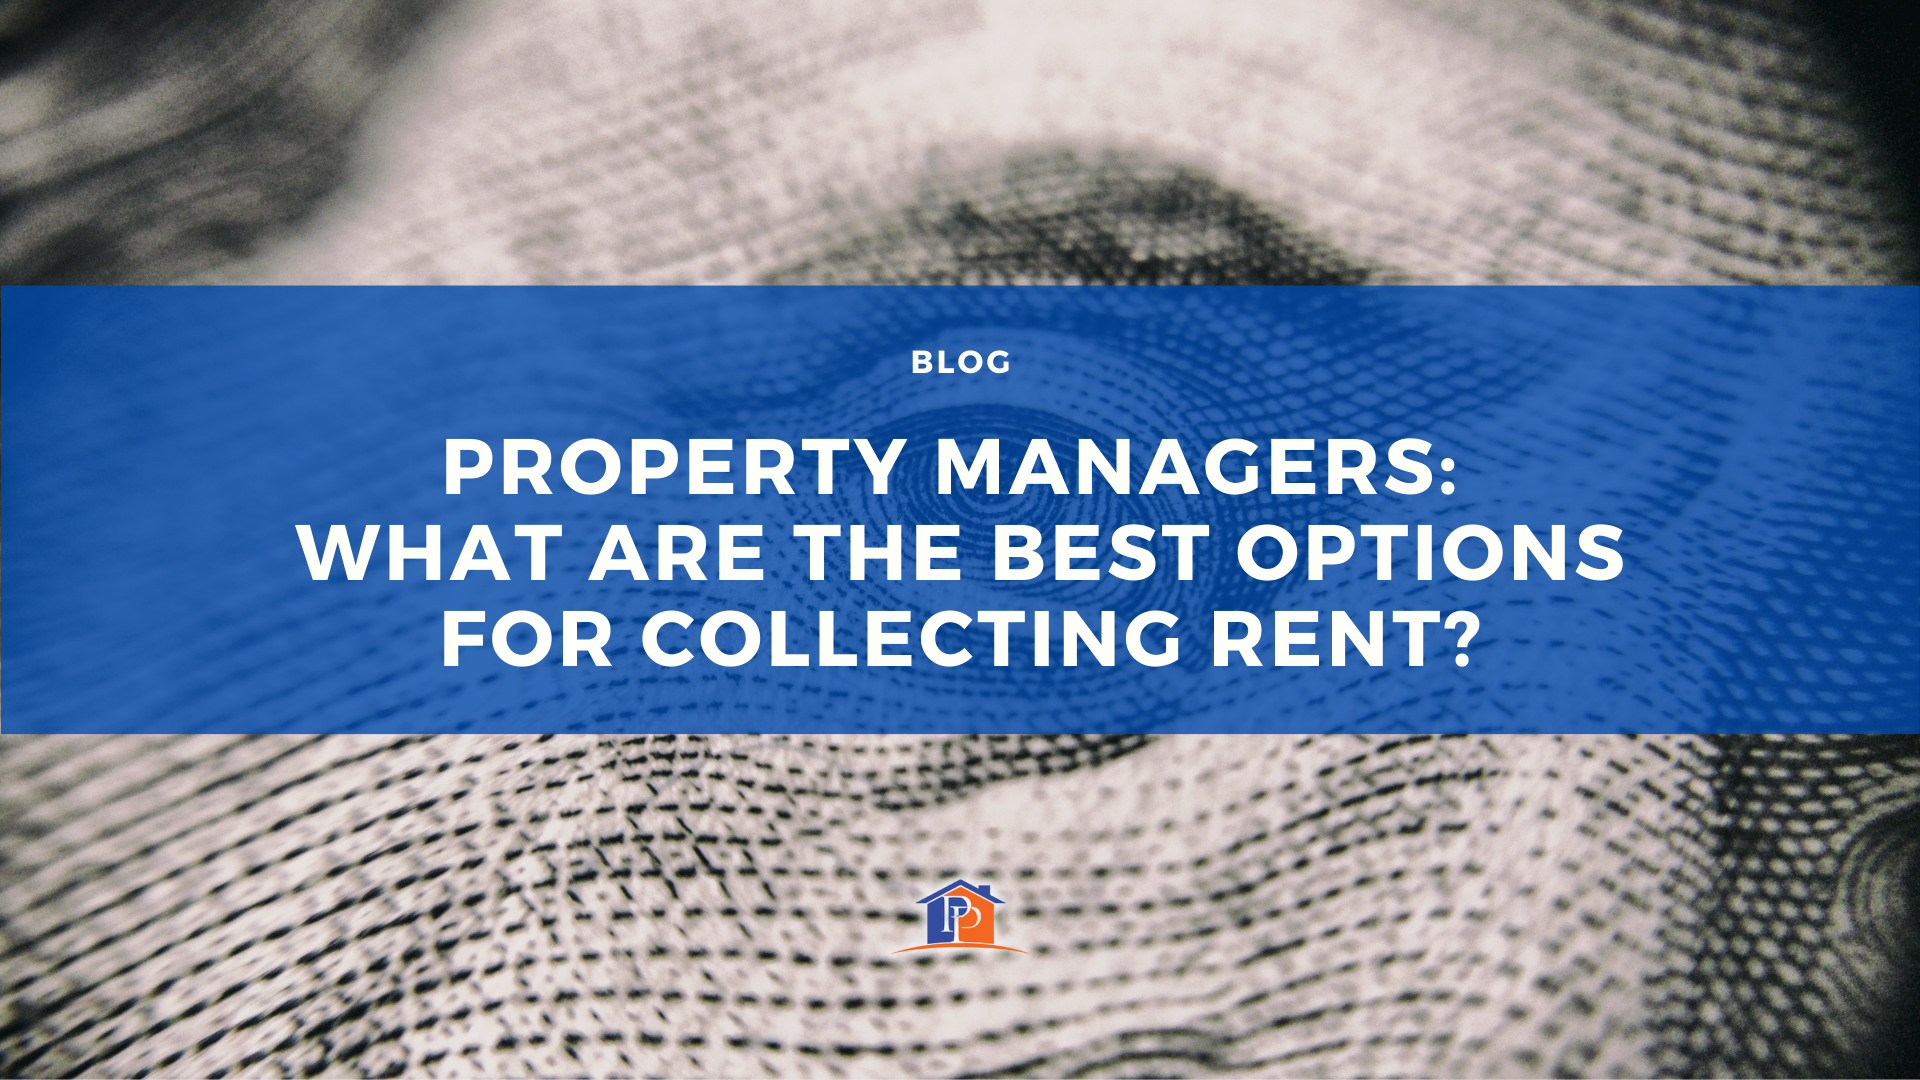 Property Managers: What Are the Best Options for Collecting Rent?